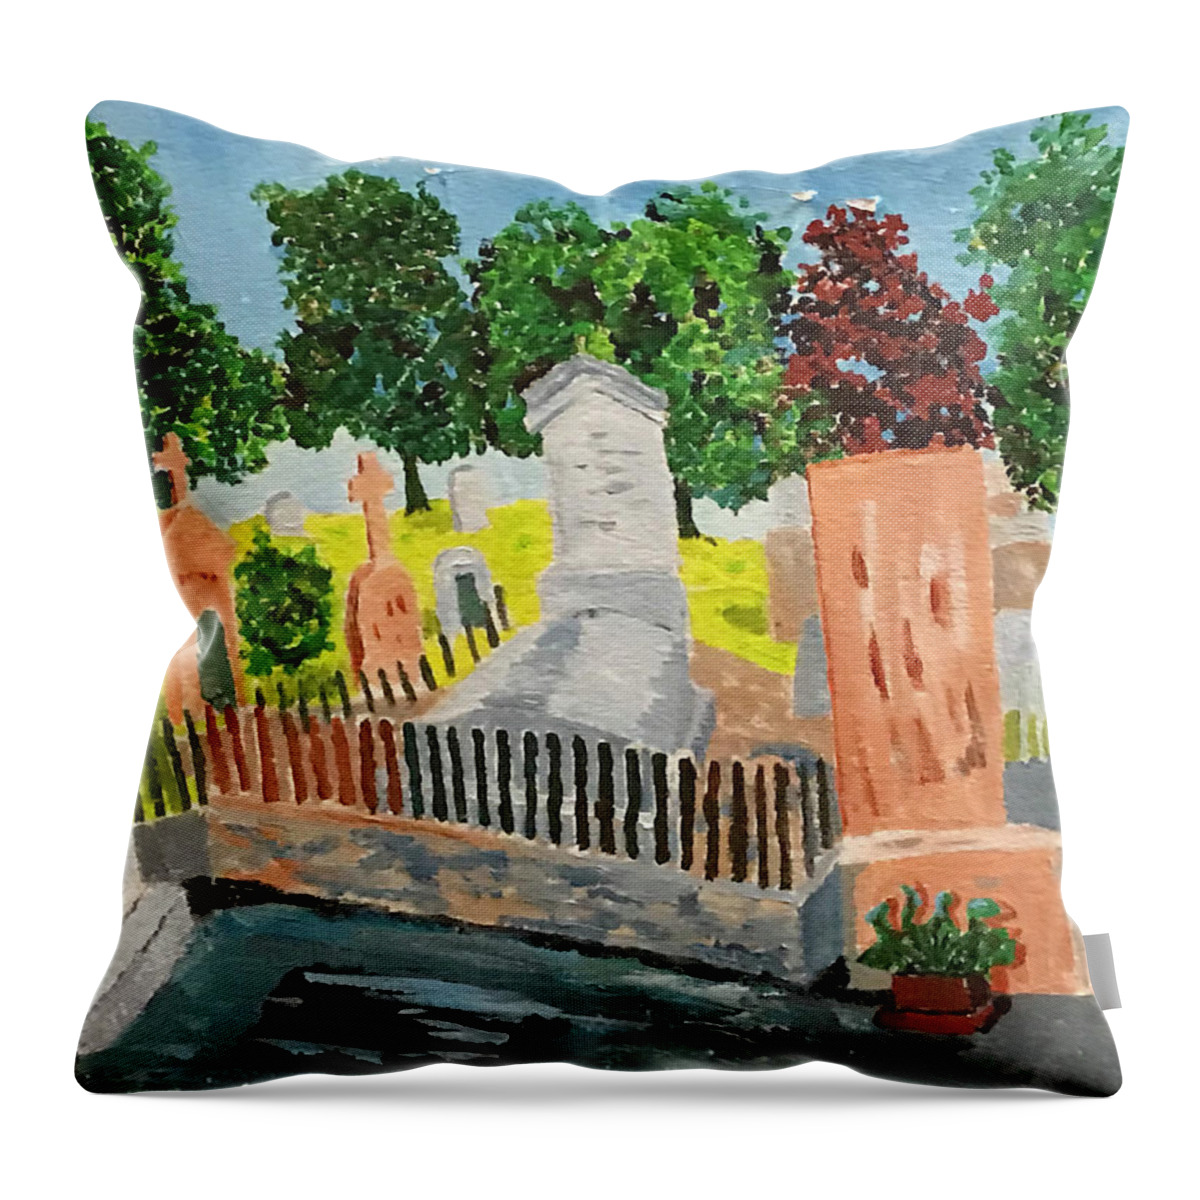  Throw Pillow featuring the painting New Orleans Cemetary by John Macarthur